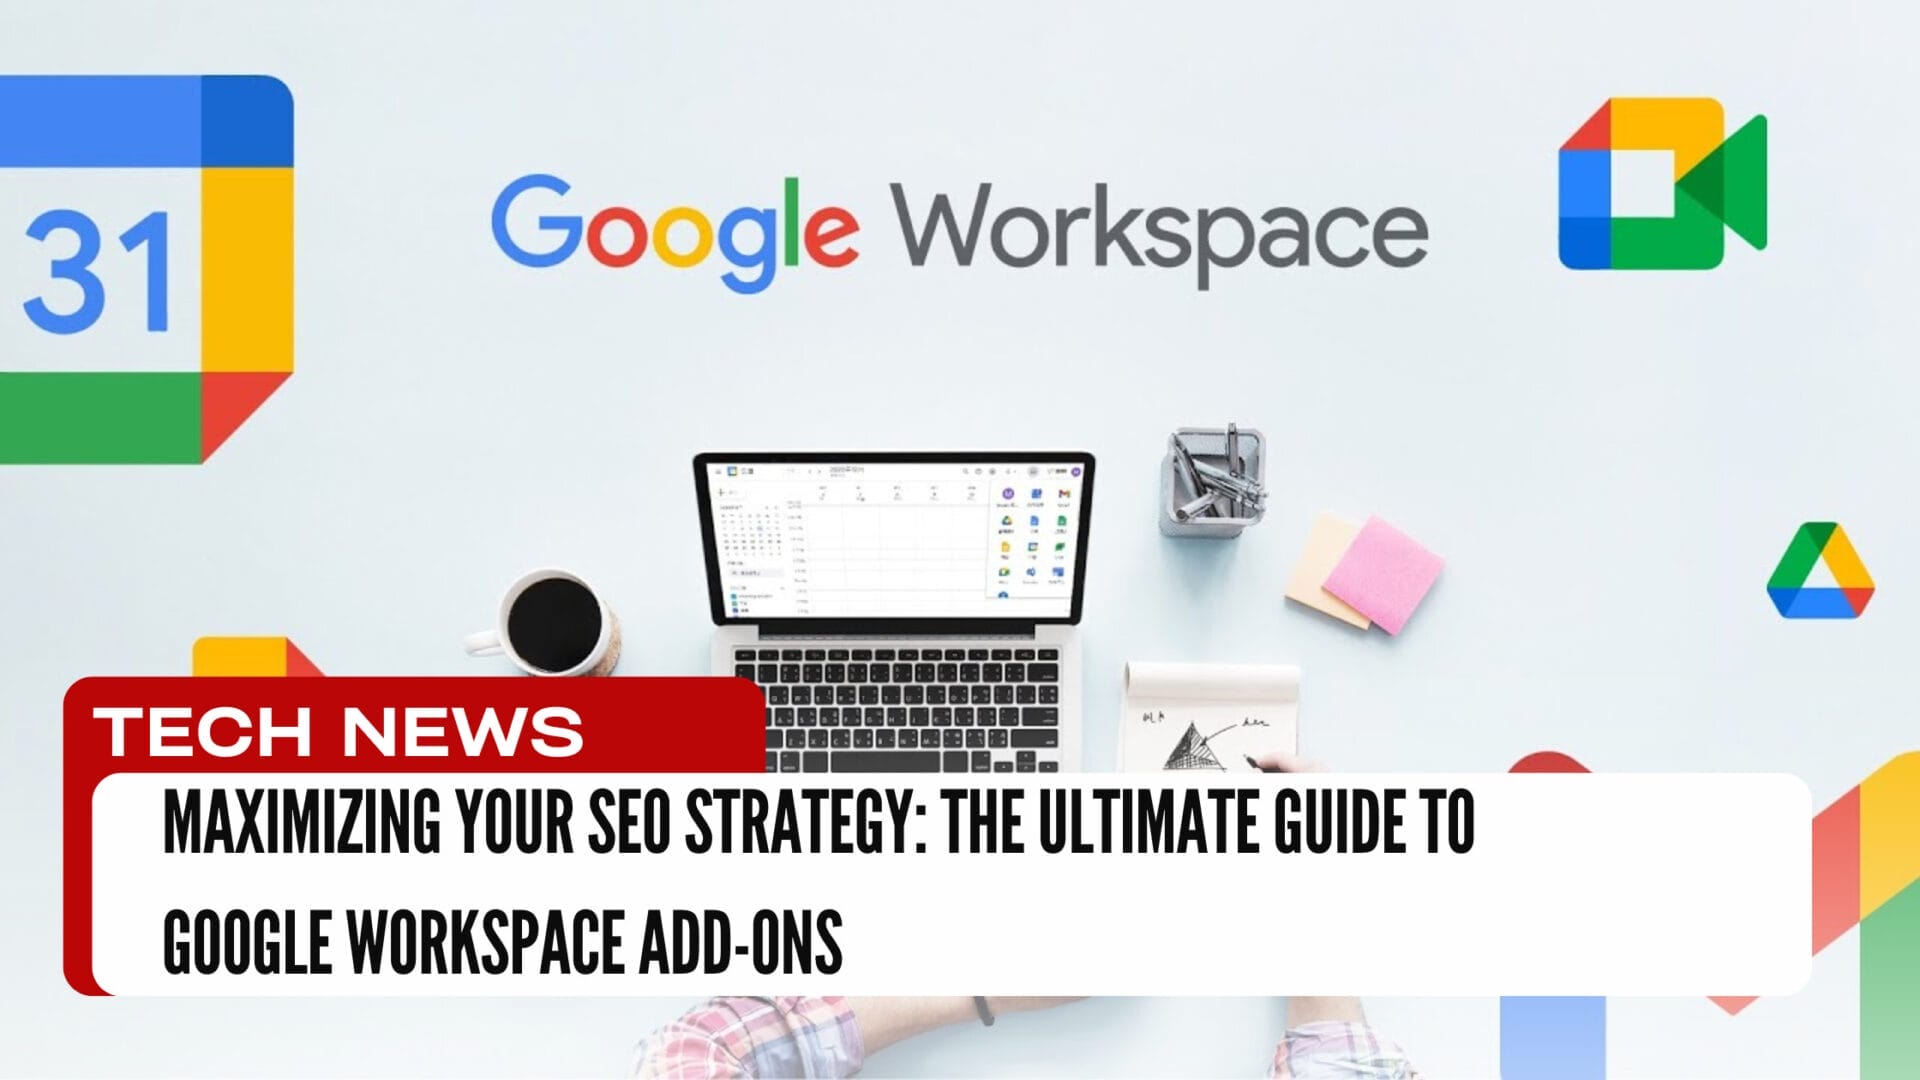 Unleash the potential of Google Workspace Add-ons in streamlining your SEO efforts. From in-depth backlink analysis to competitor insights and SERP tracking, learn how these tools can elevate your business's online visibility and success.